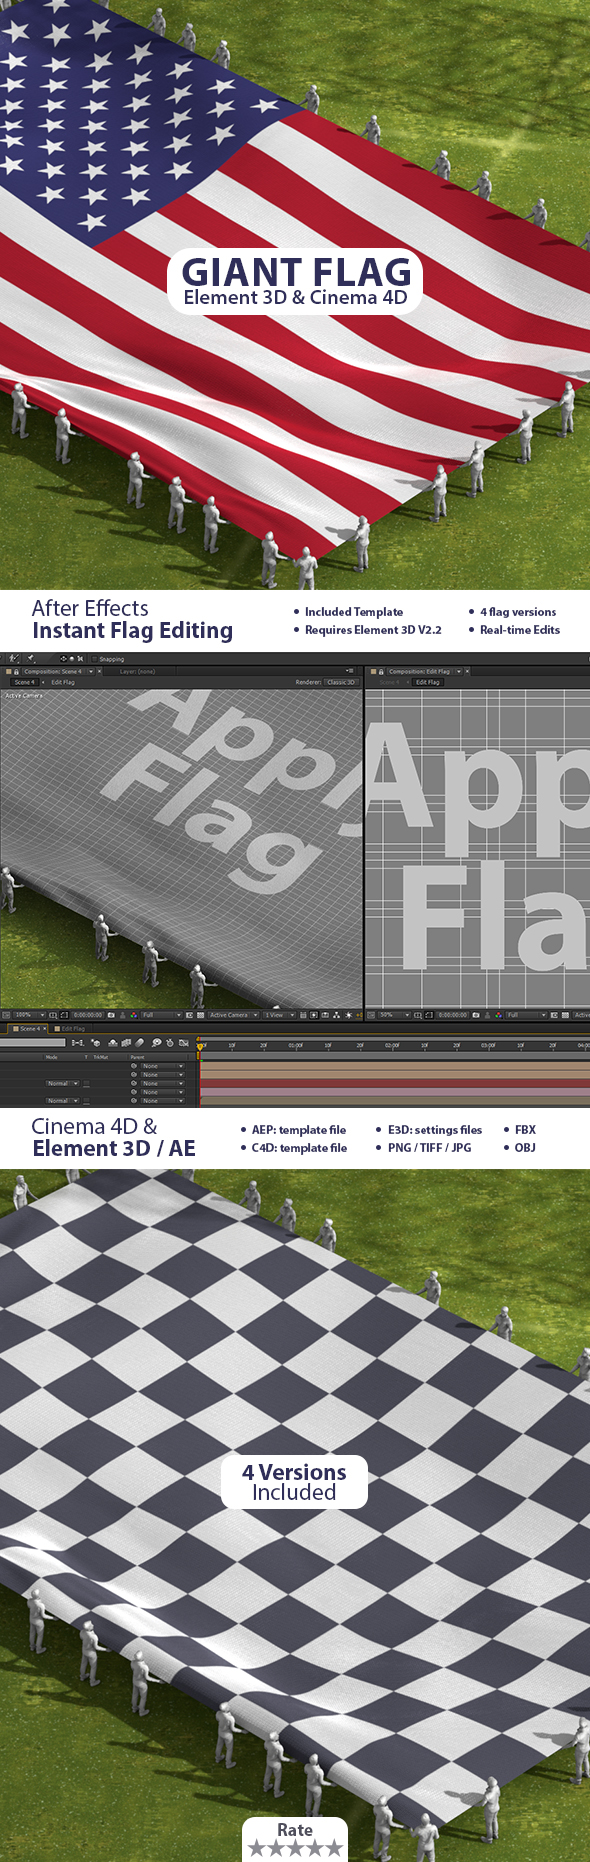 [DOWNLOAD]People Holding Giant Flag in Stadium for Cinema 4D - After Effects